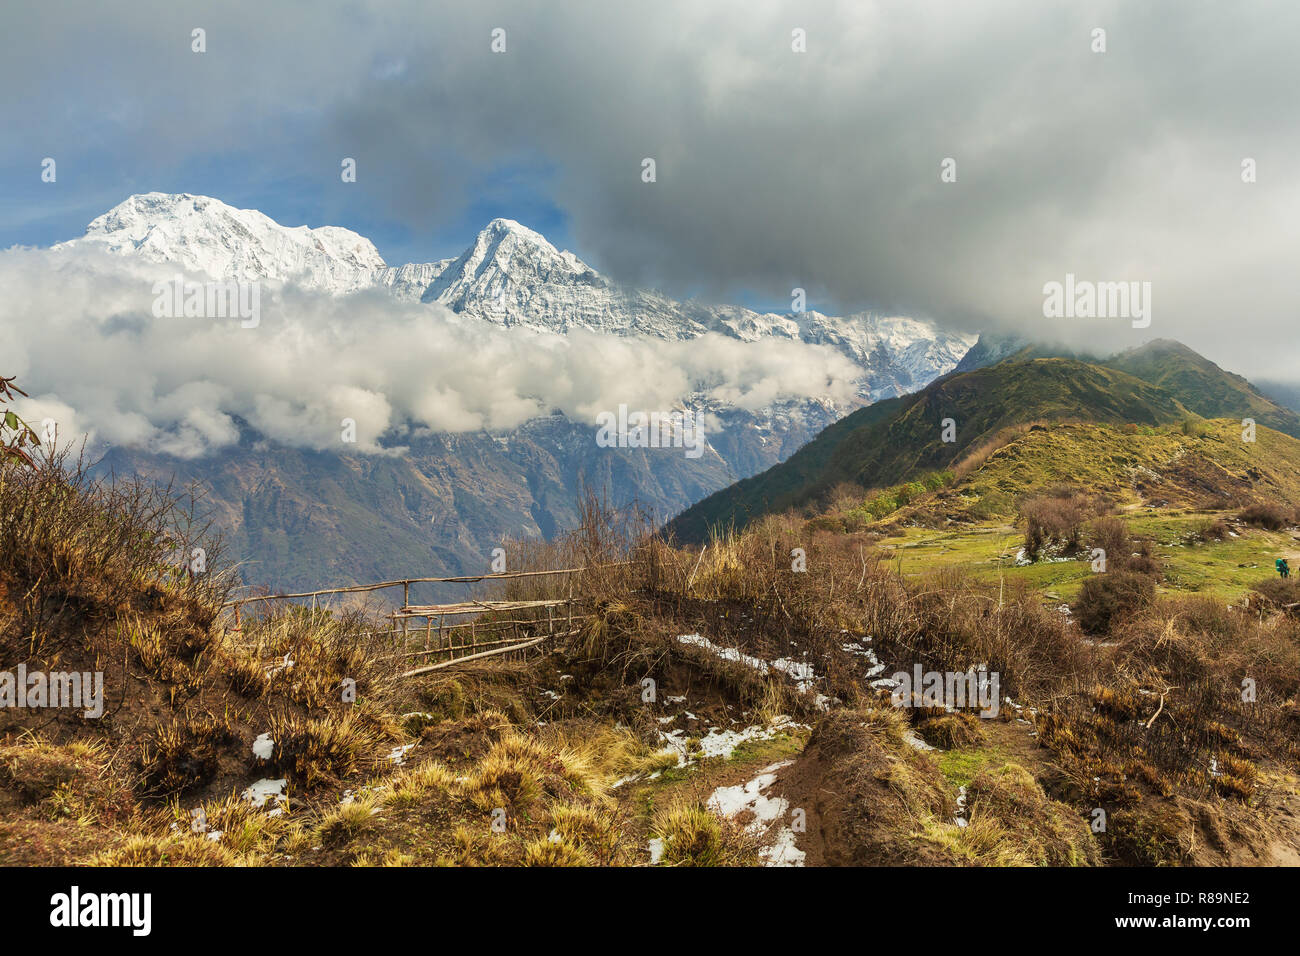 View of snowy mountain peaks on train to Mardi Himalayans in the Annapurna Himal, Nepal, Himalayas, Asia Stock Photo